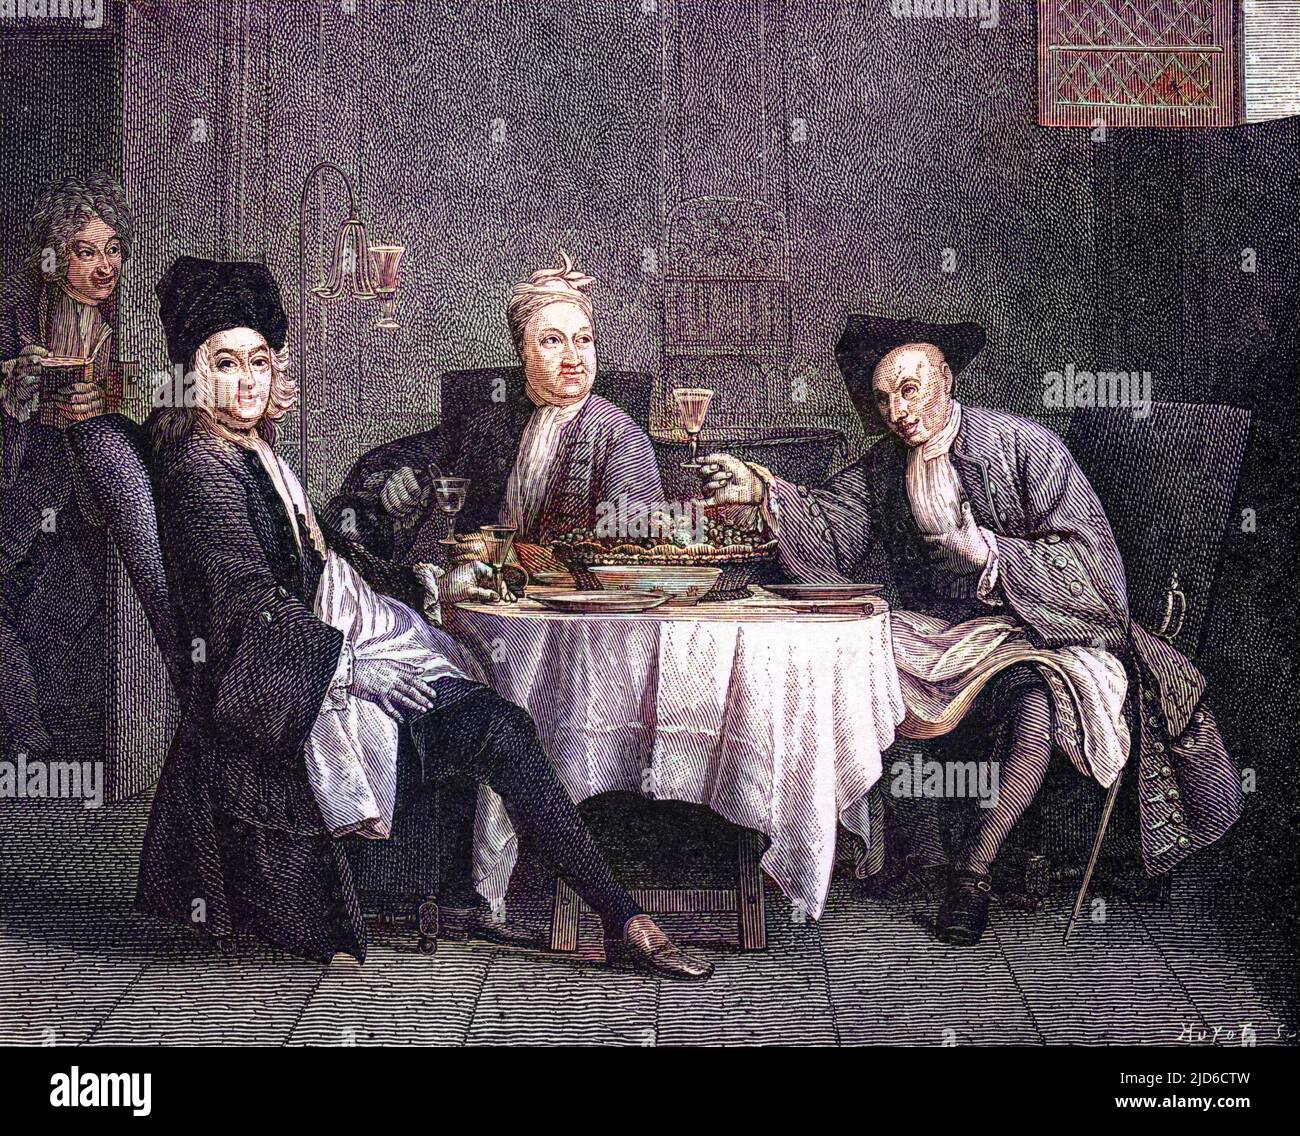 ALEXIS PIRON French writer, dining with two friends Colle and Gallet on either side of him. Colourised version of : 10172712       Date: 1689 - 1773 Stock Photo